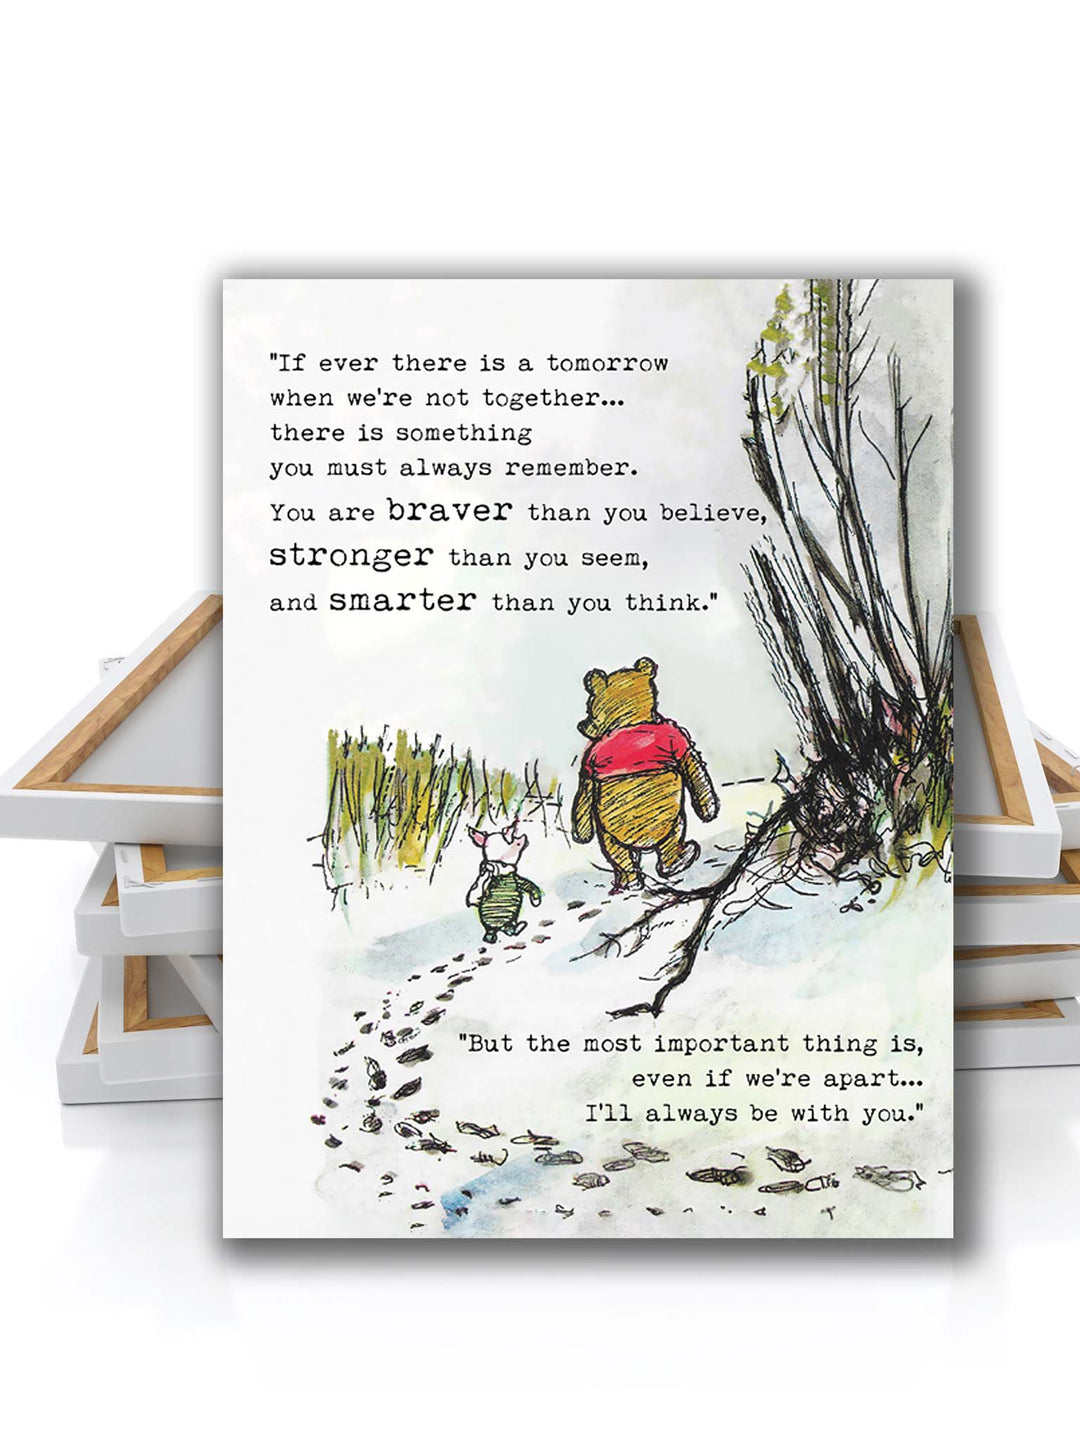 Promise Me You Are Braver Than You Believe, Winnie the Pooh Quote, Pooh wall decor, Pooh print 